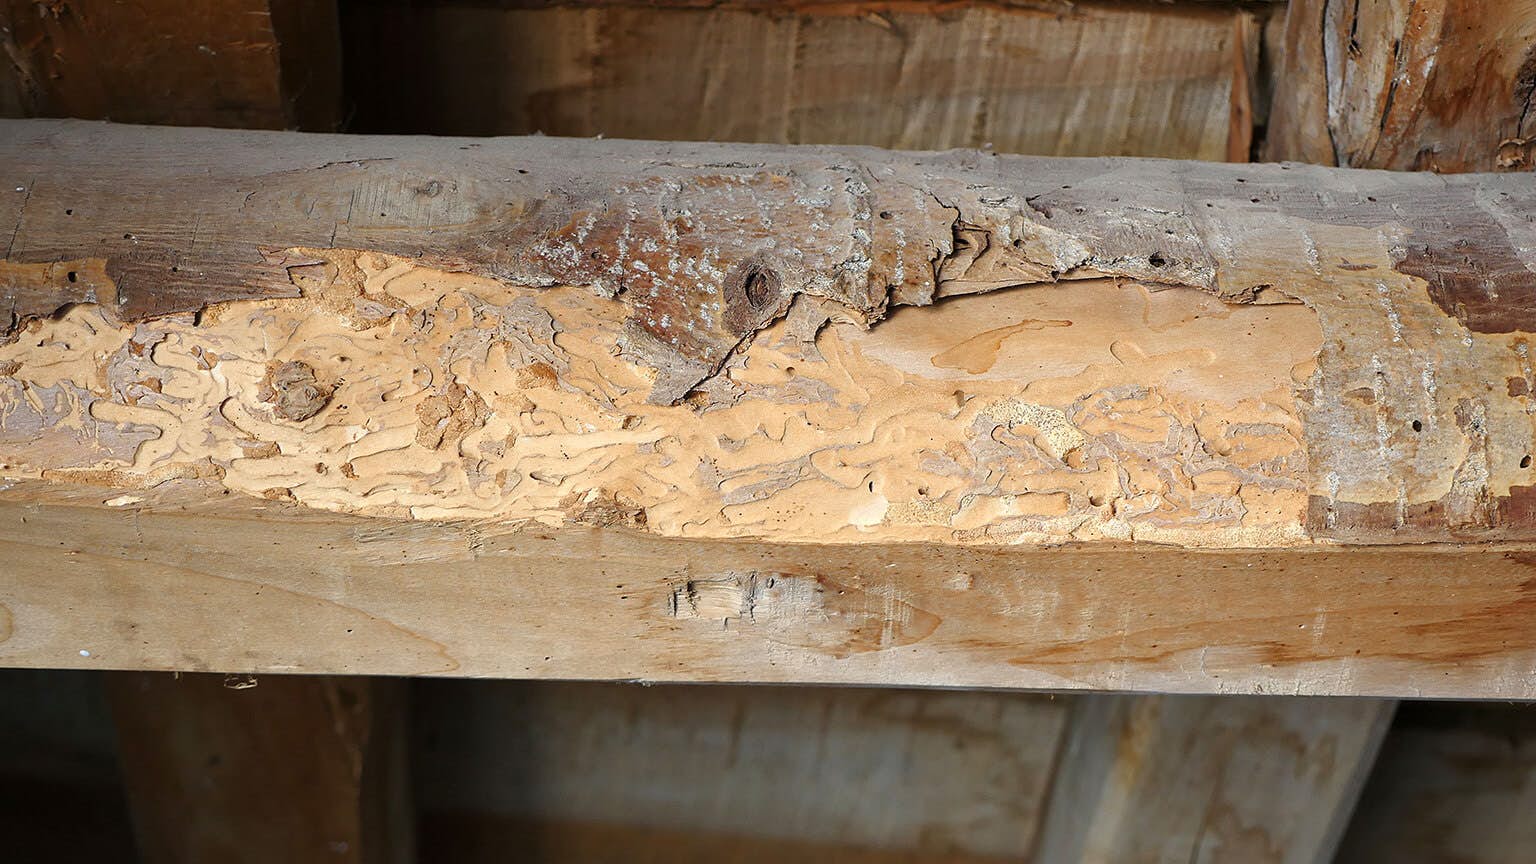 Termite Damage in Basement Wooden Supports